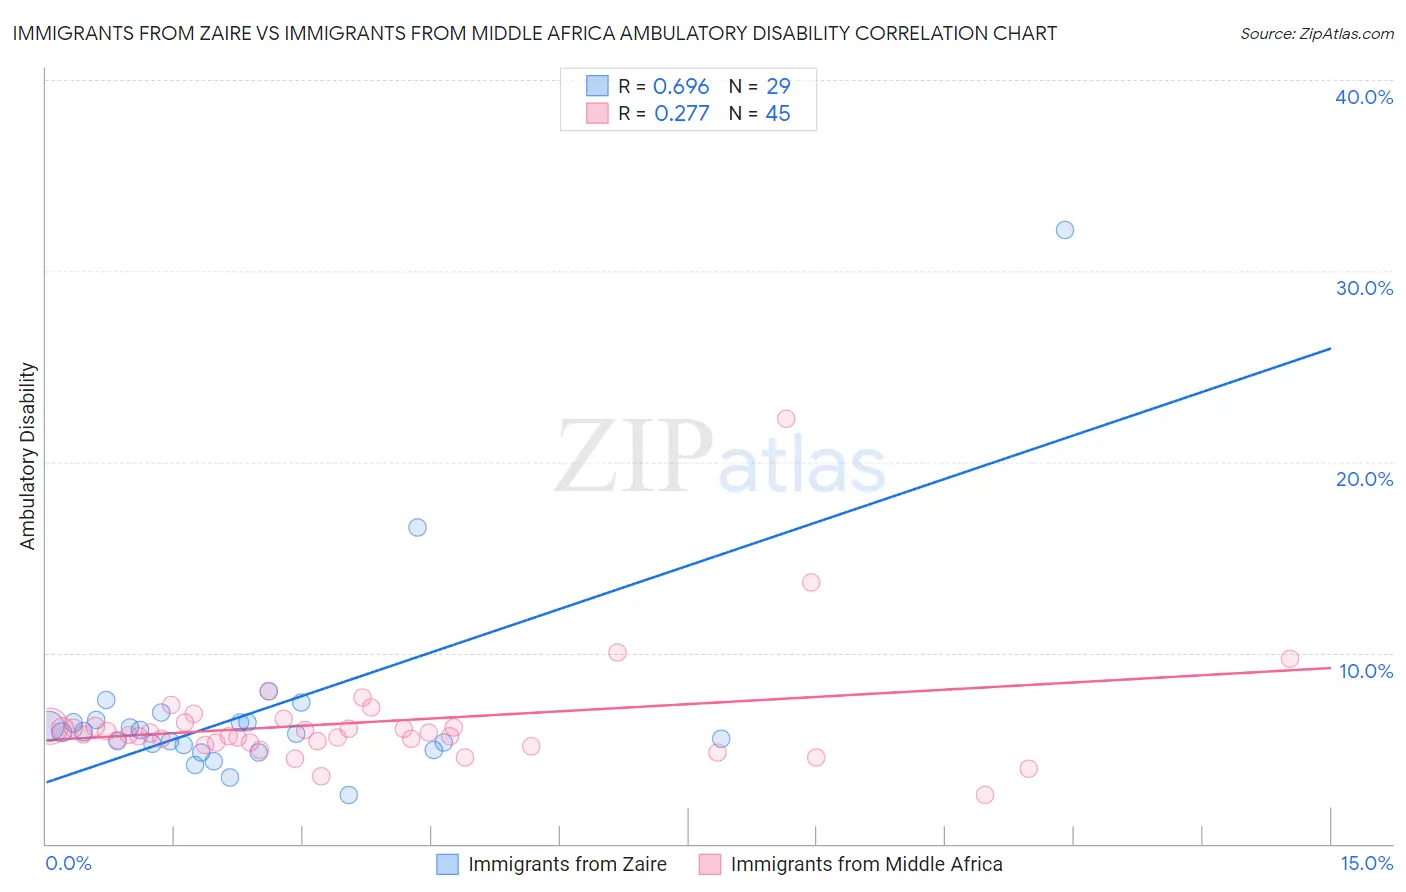 Immigrants from Zaire vs Immigrants from Middle Africa Ambulatory Disability